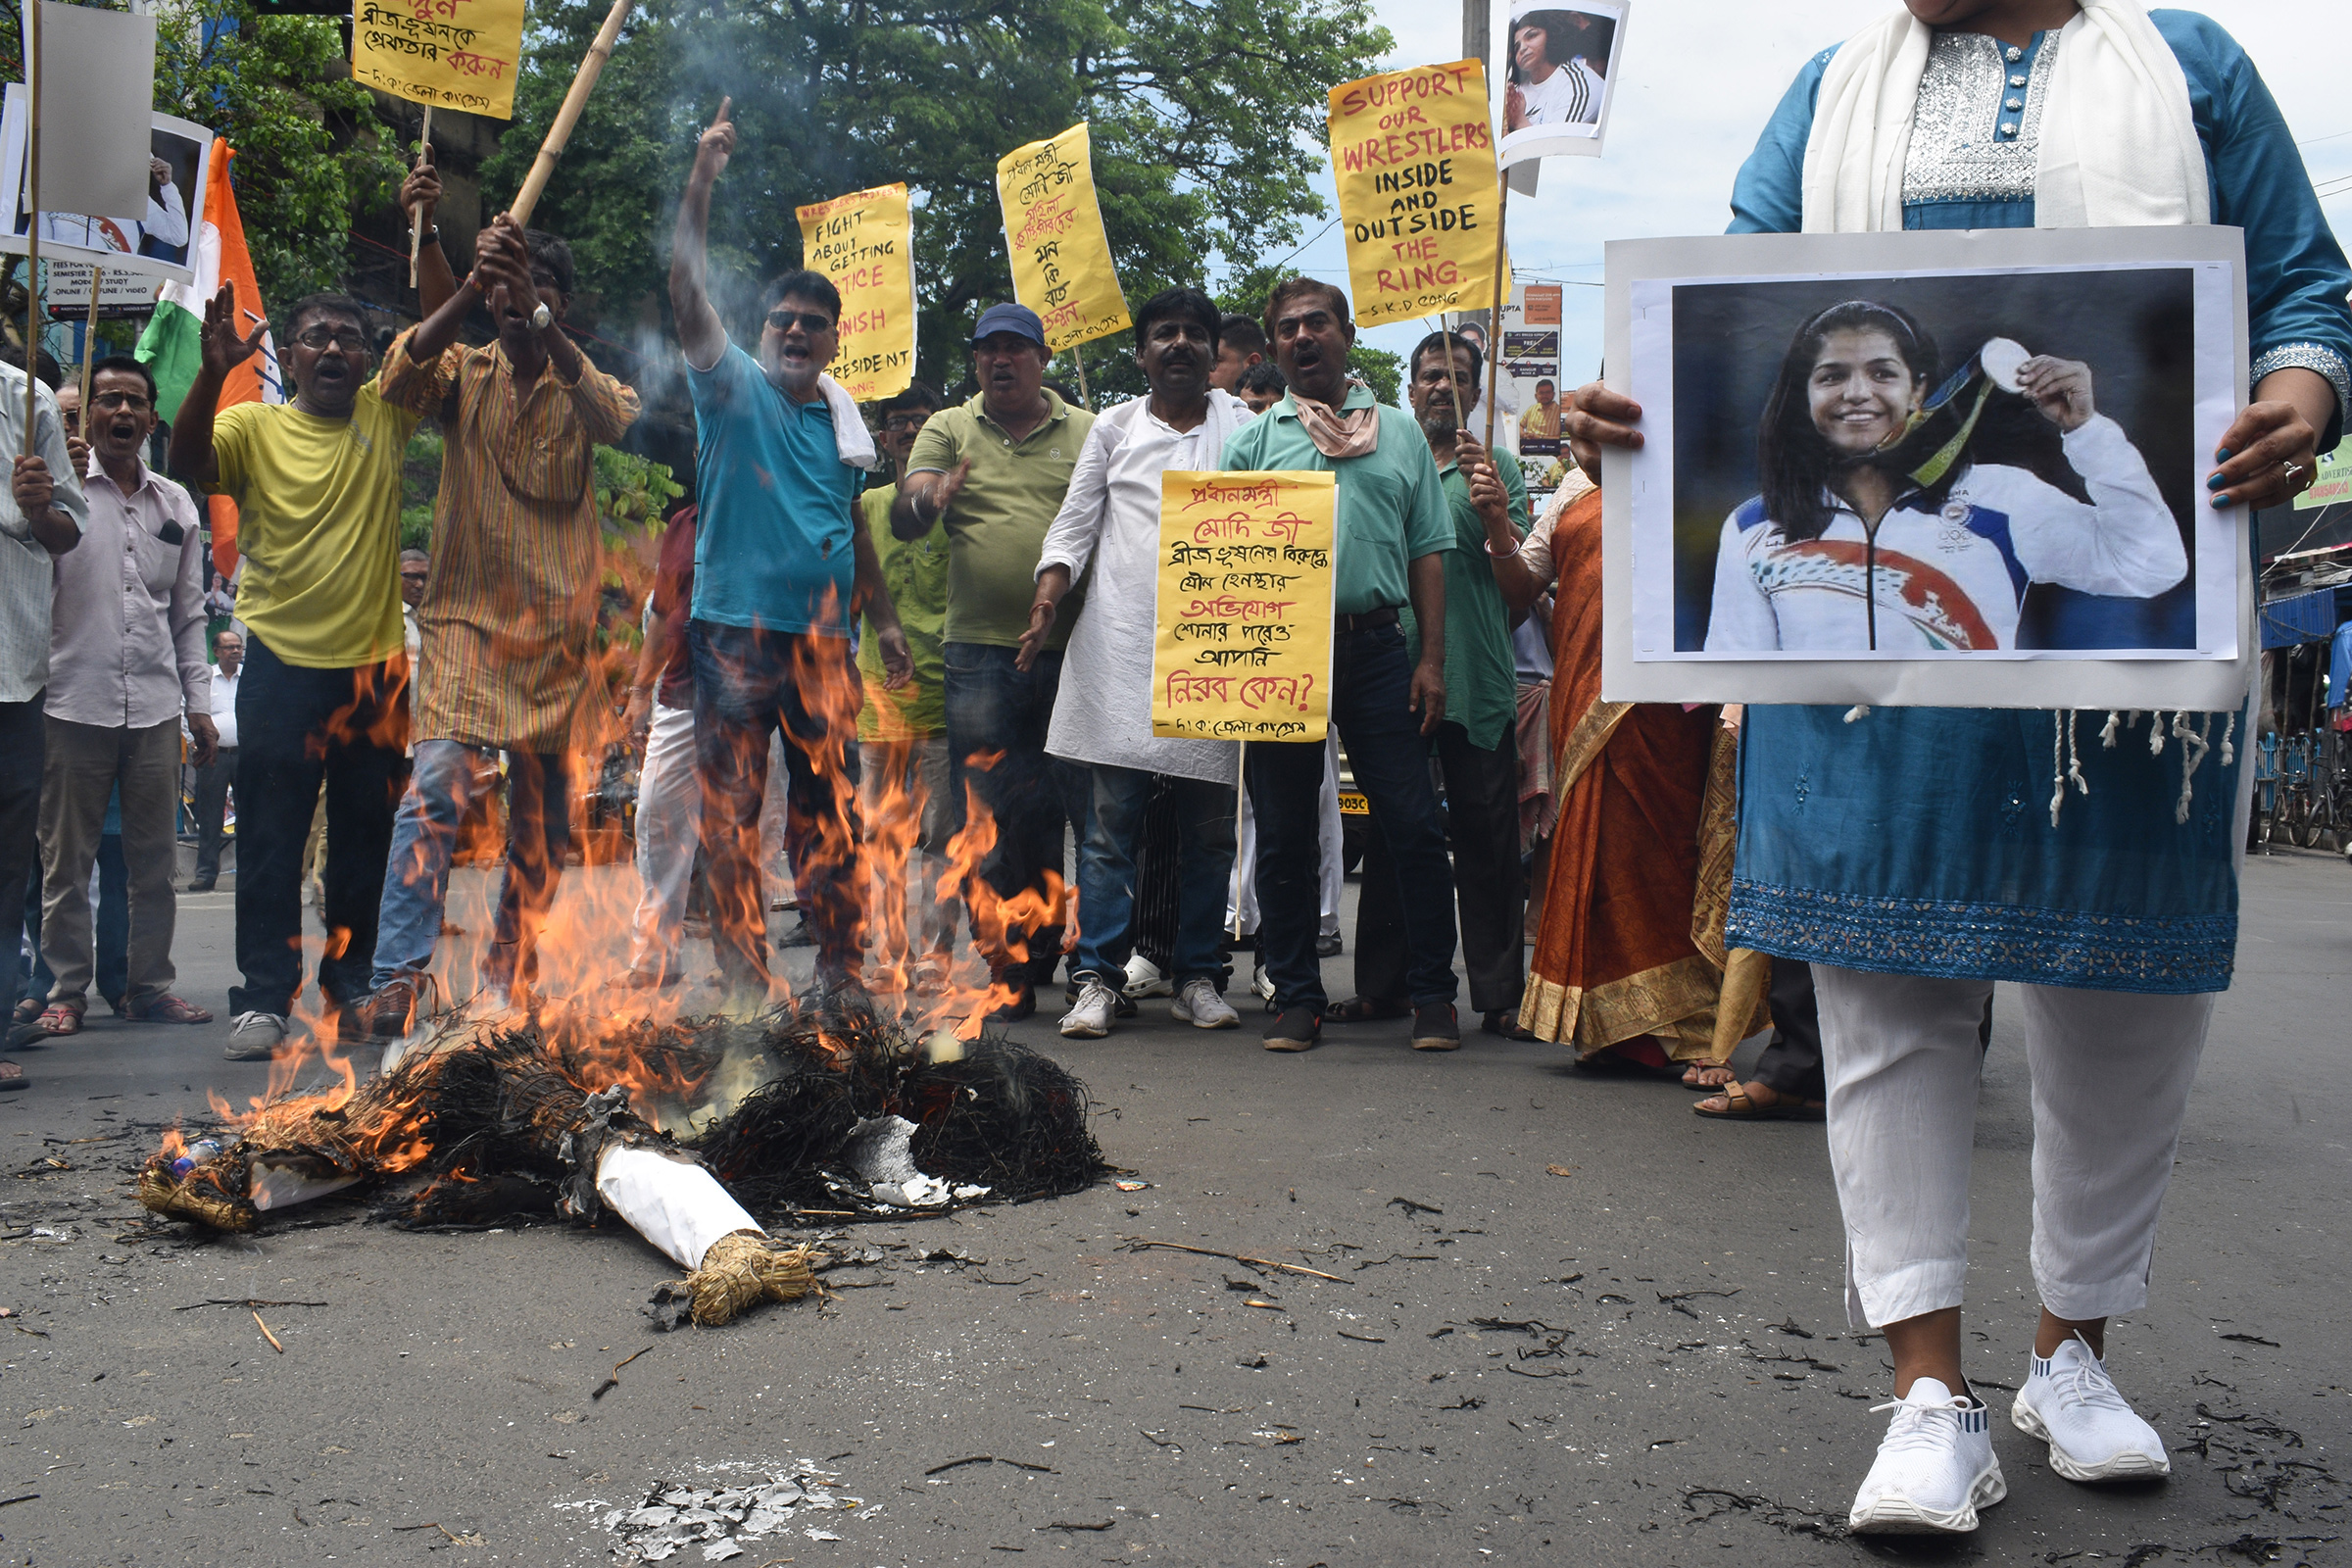 Activists of India's opposition Congress party protest in Kolkata on May 4, demanding the arrest of WFI leader Brij Bhushan Saran Singh. (Sayantan Chakraborty—Pacific Press/Shutterstock)